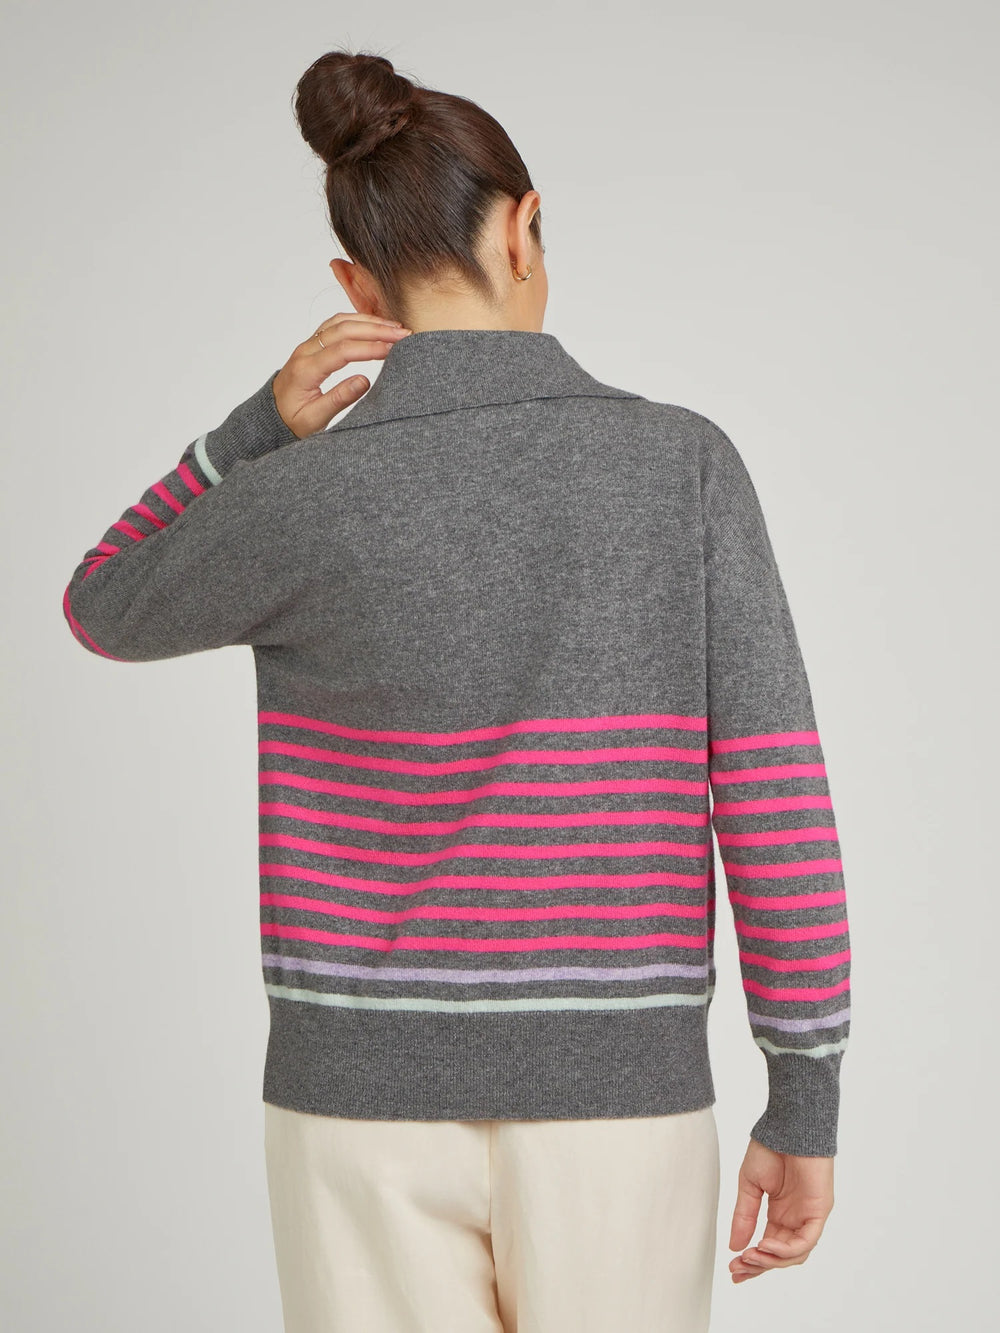 Cocoa Cashmere -The Frankie Collared Sweater is knitted in melange yarn with vibrant pink stripes and contrasting pastel stripes at the hem.